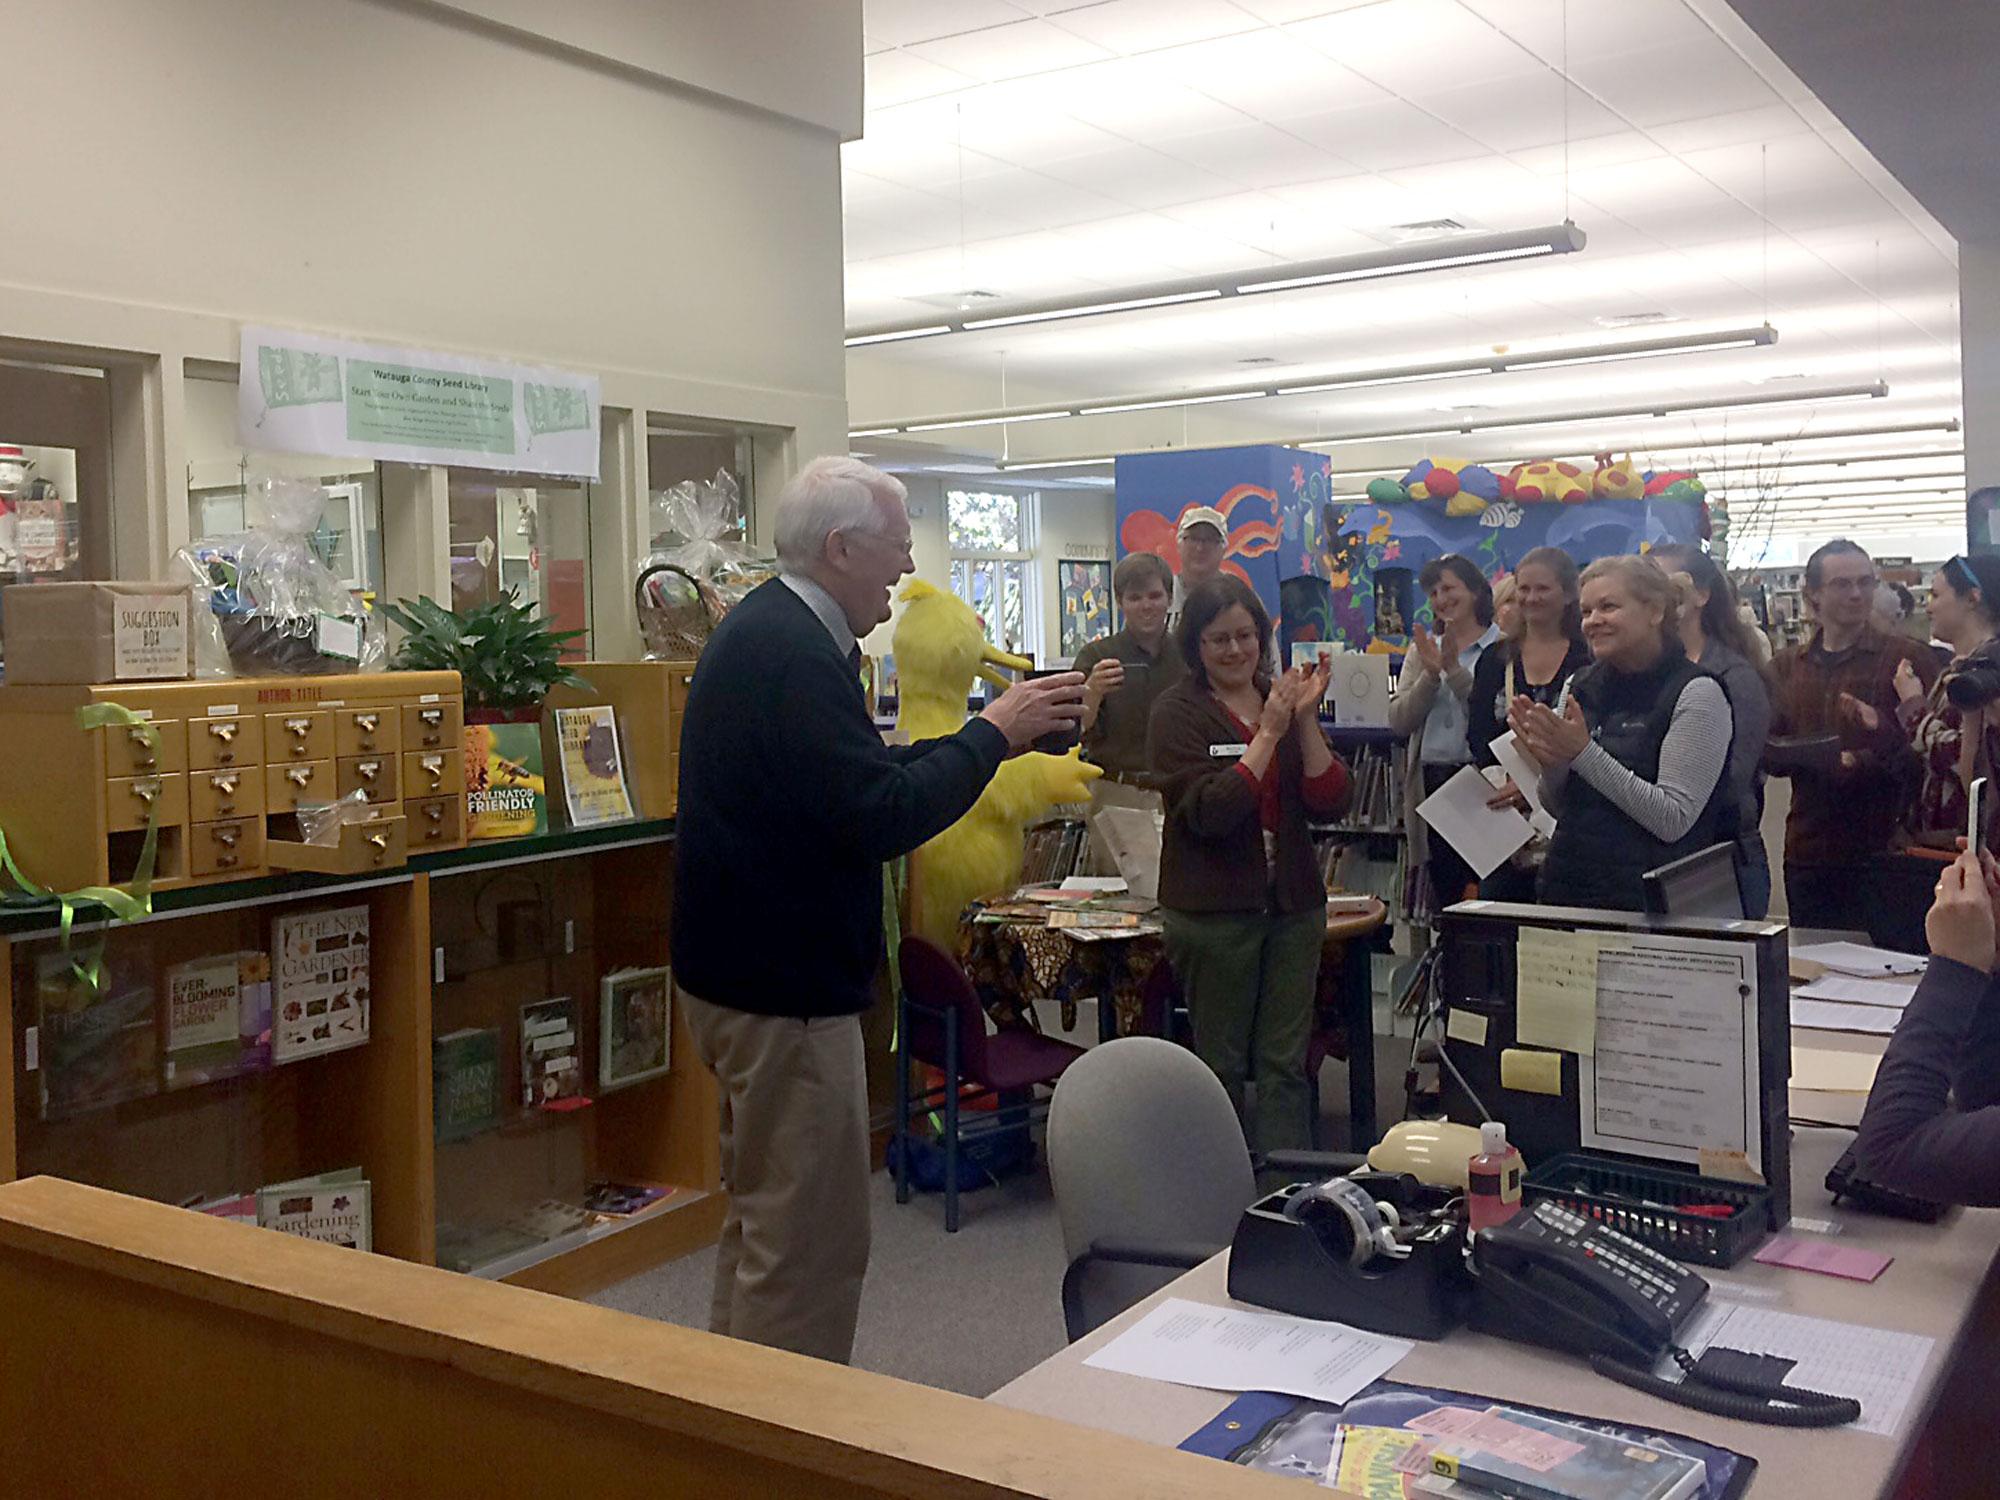 Mayor Rennie Brantz plants a sunflower seed after cutting the ceremonial ribbon at the grand opening of the seed library on April 1. The seed library provides over 100 seeds, free for the public to check out. 